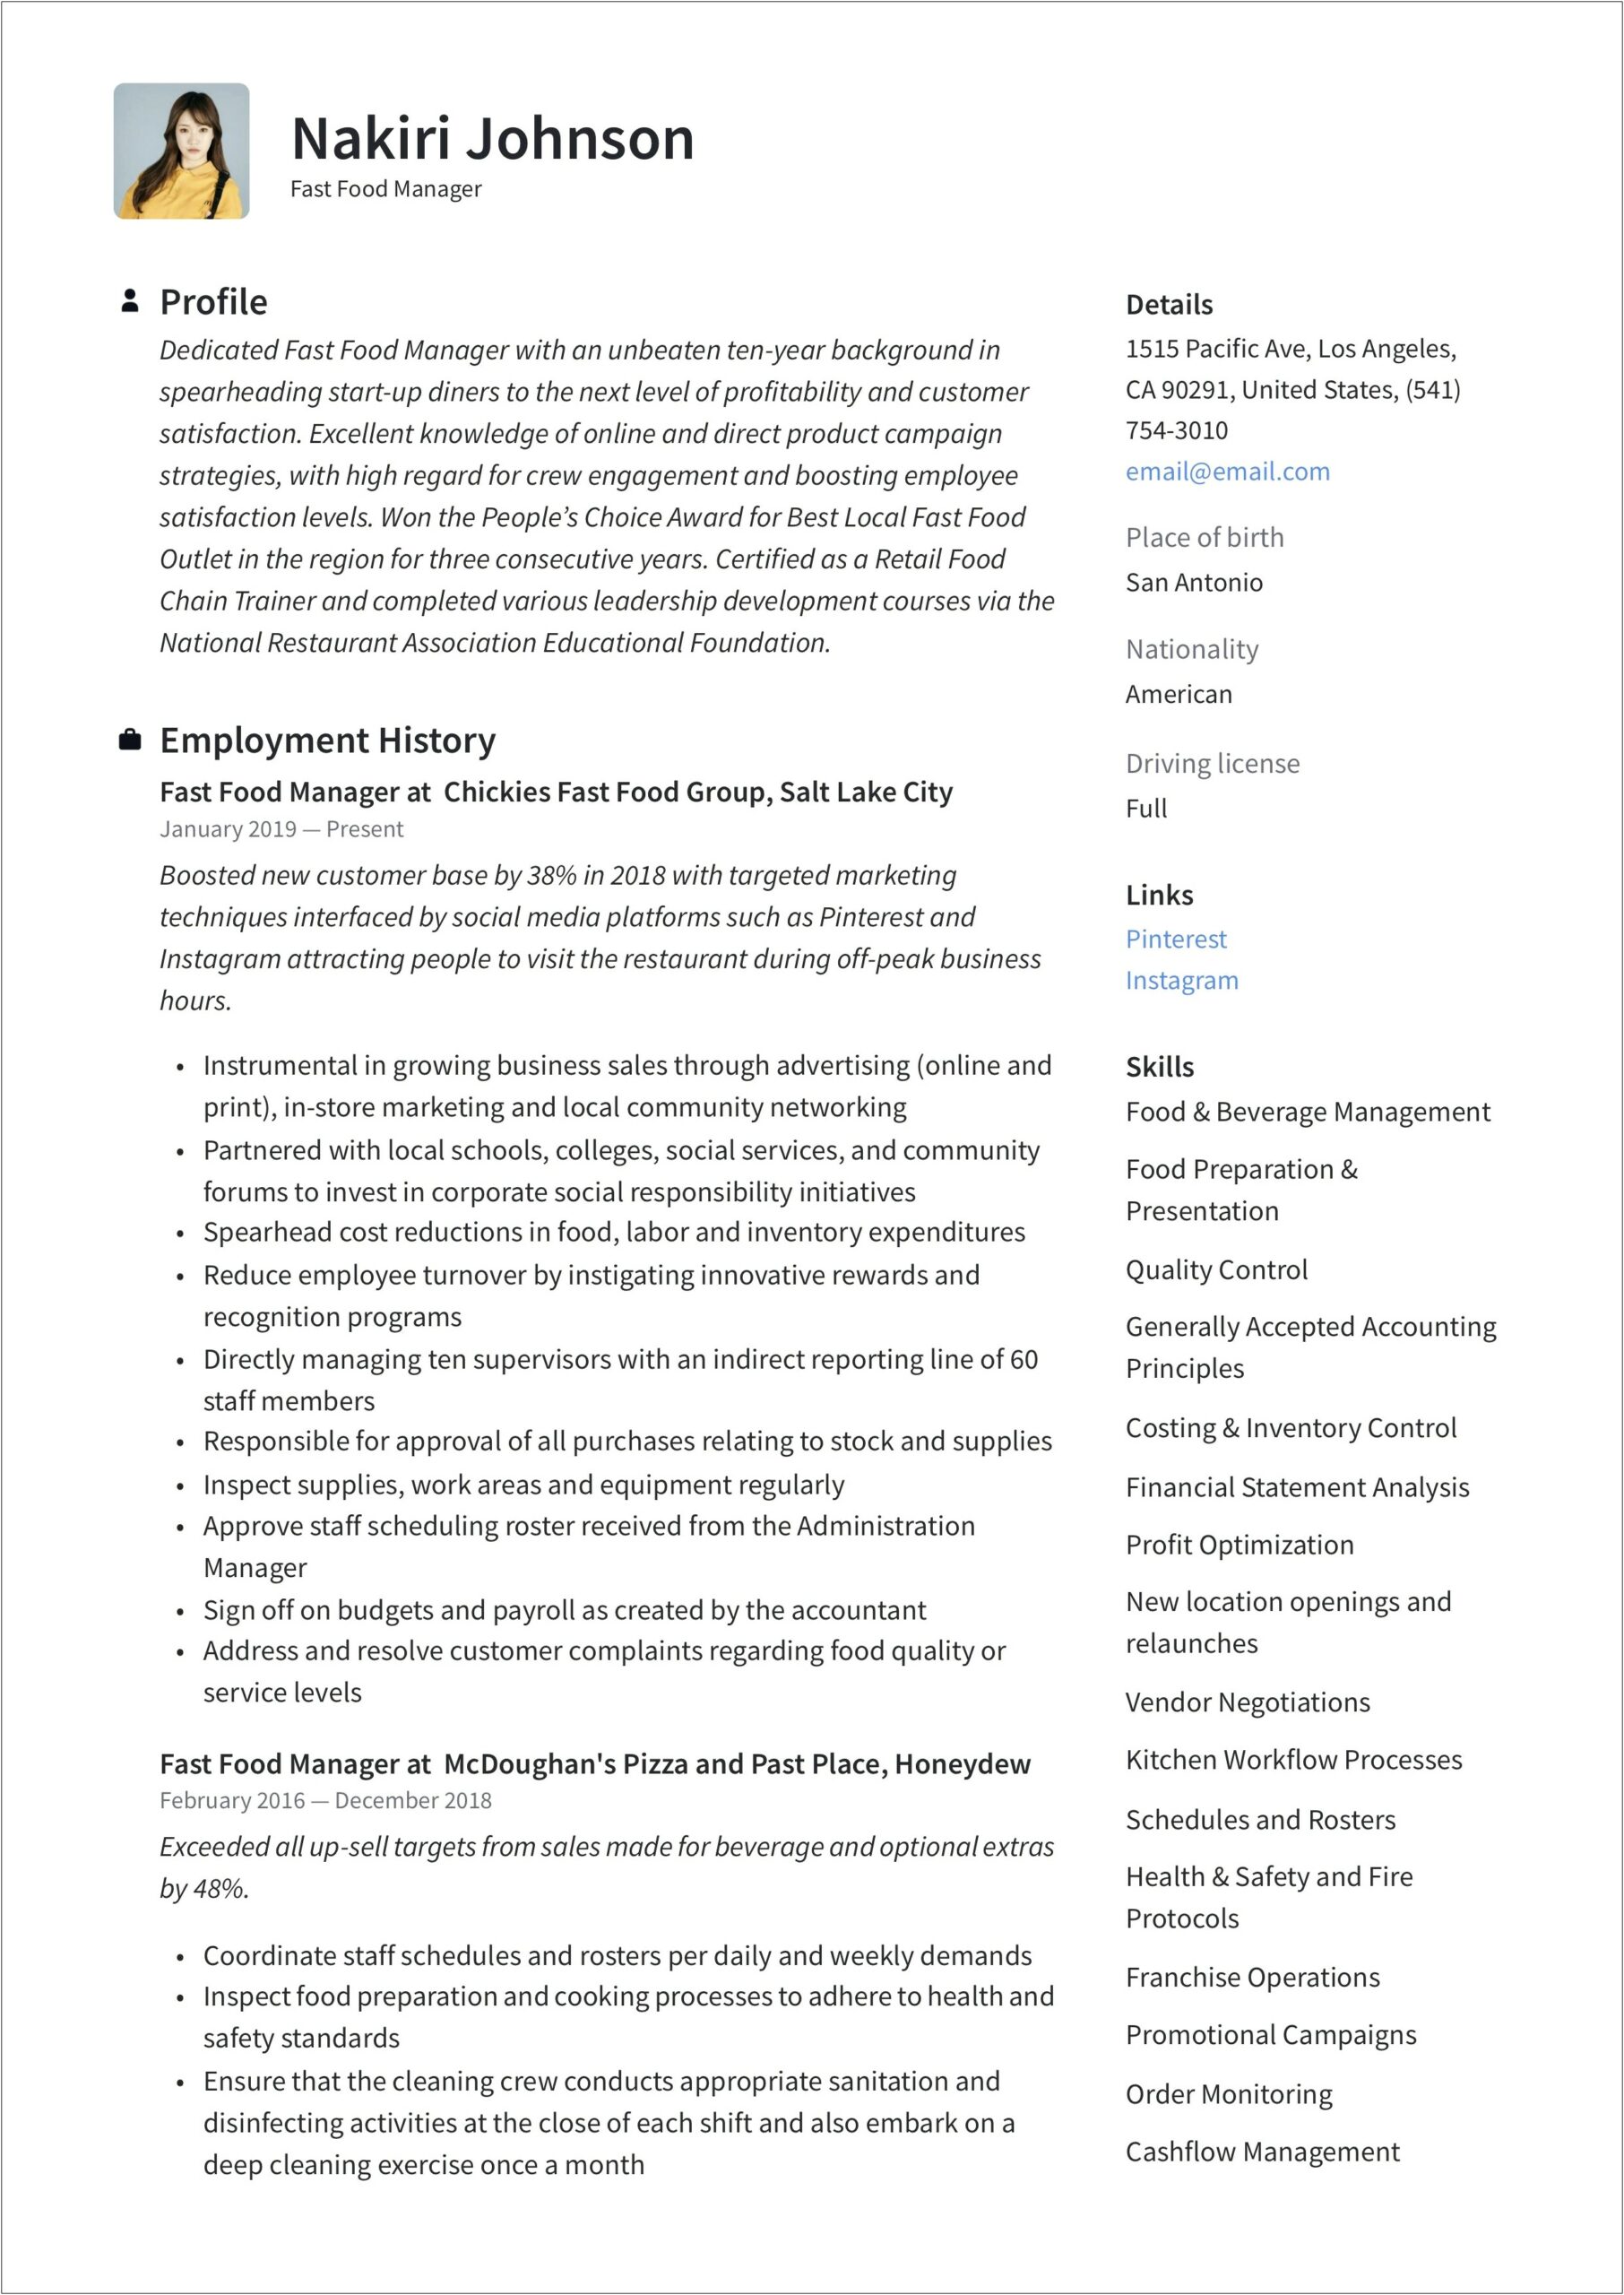 Resume Accomplishment Statements For Managers